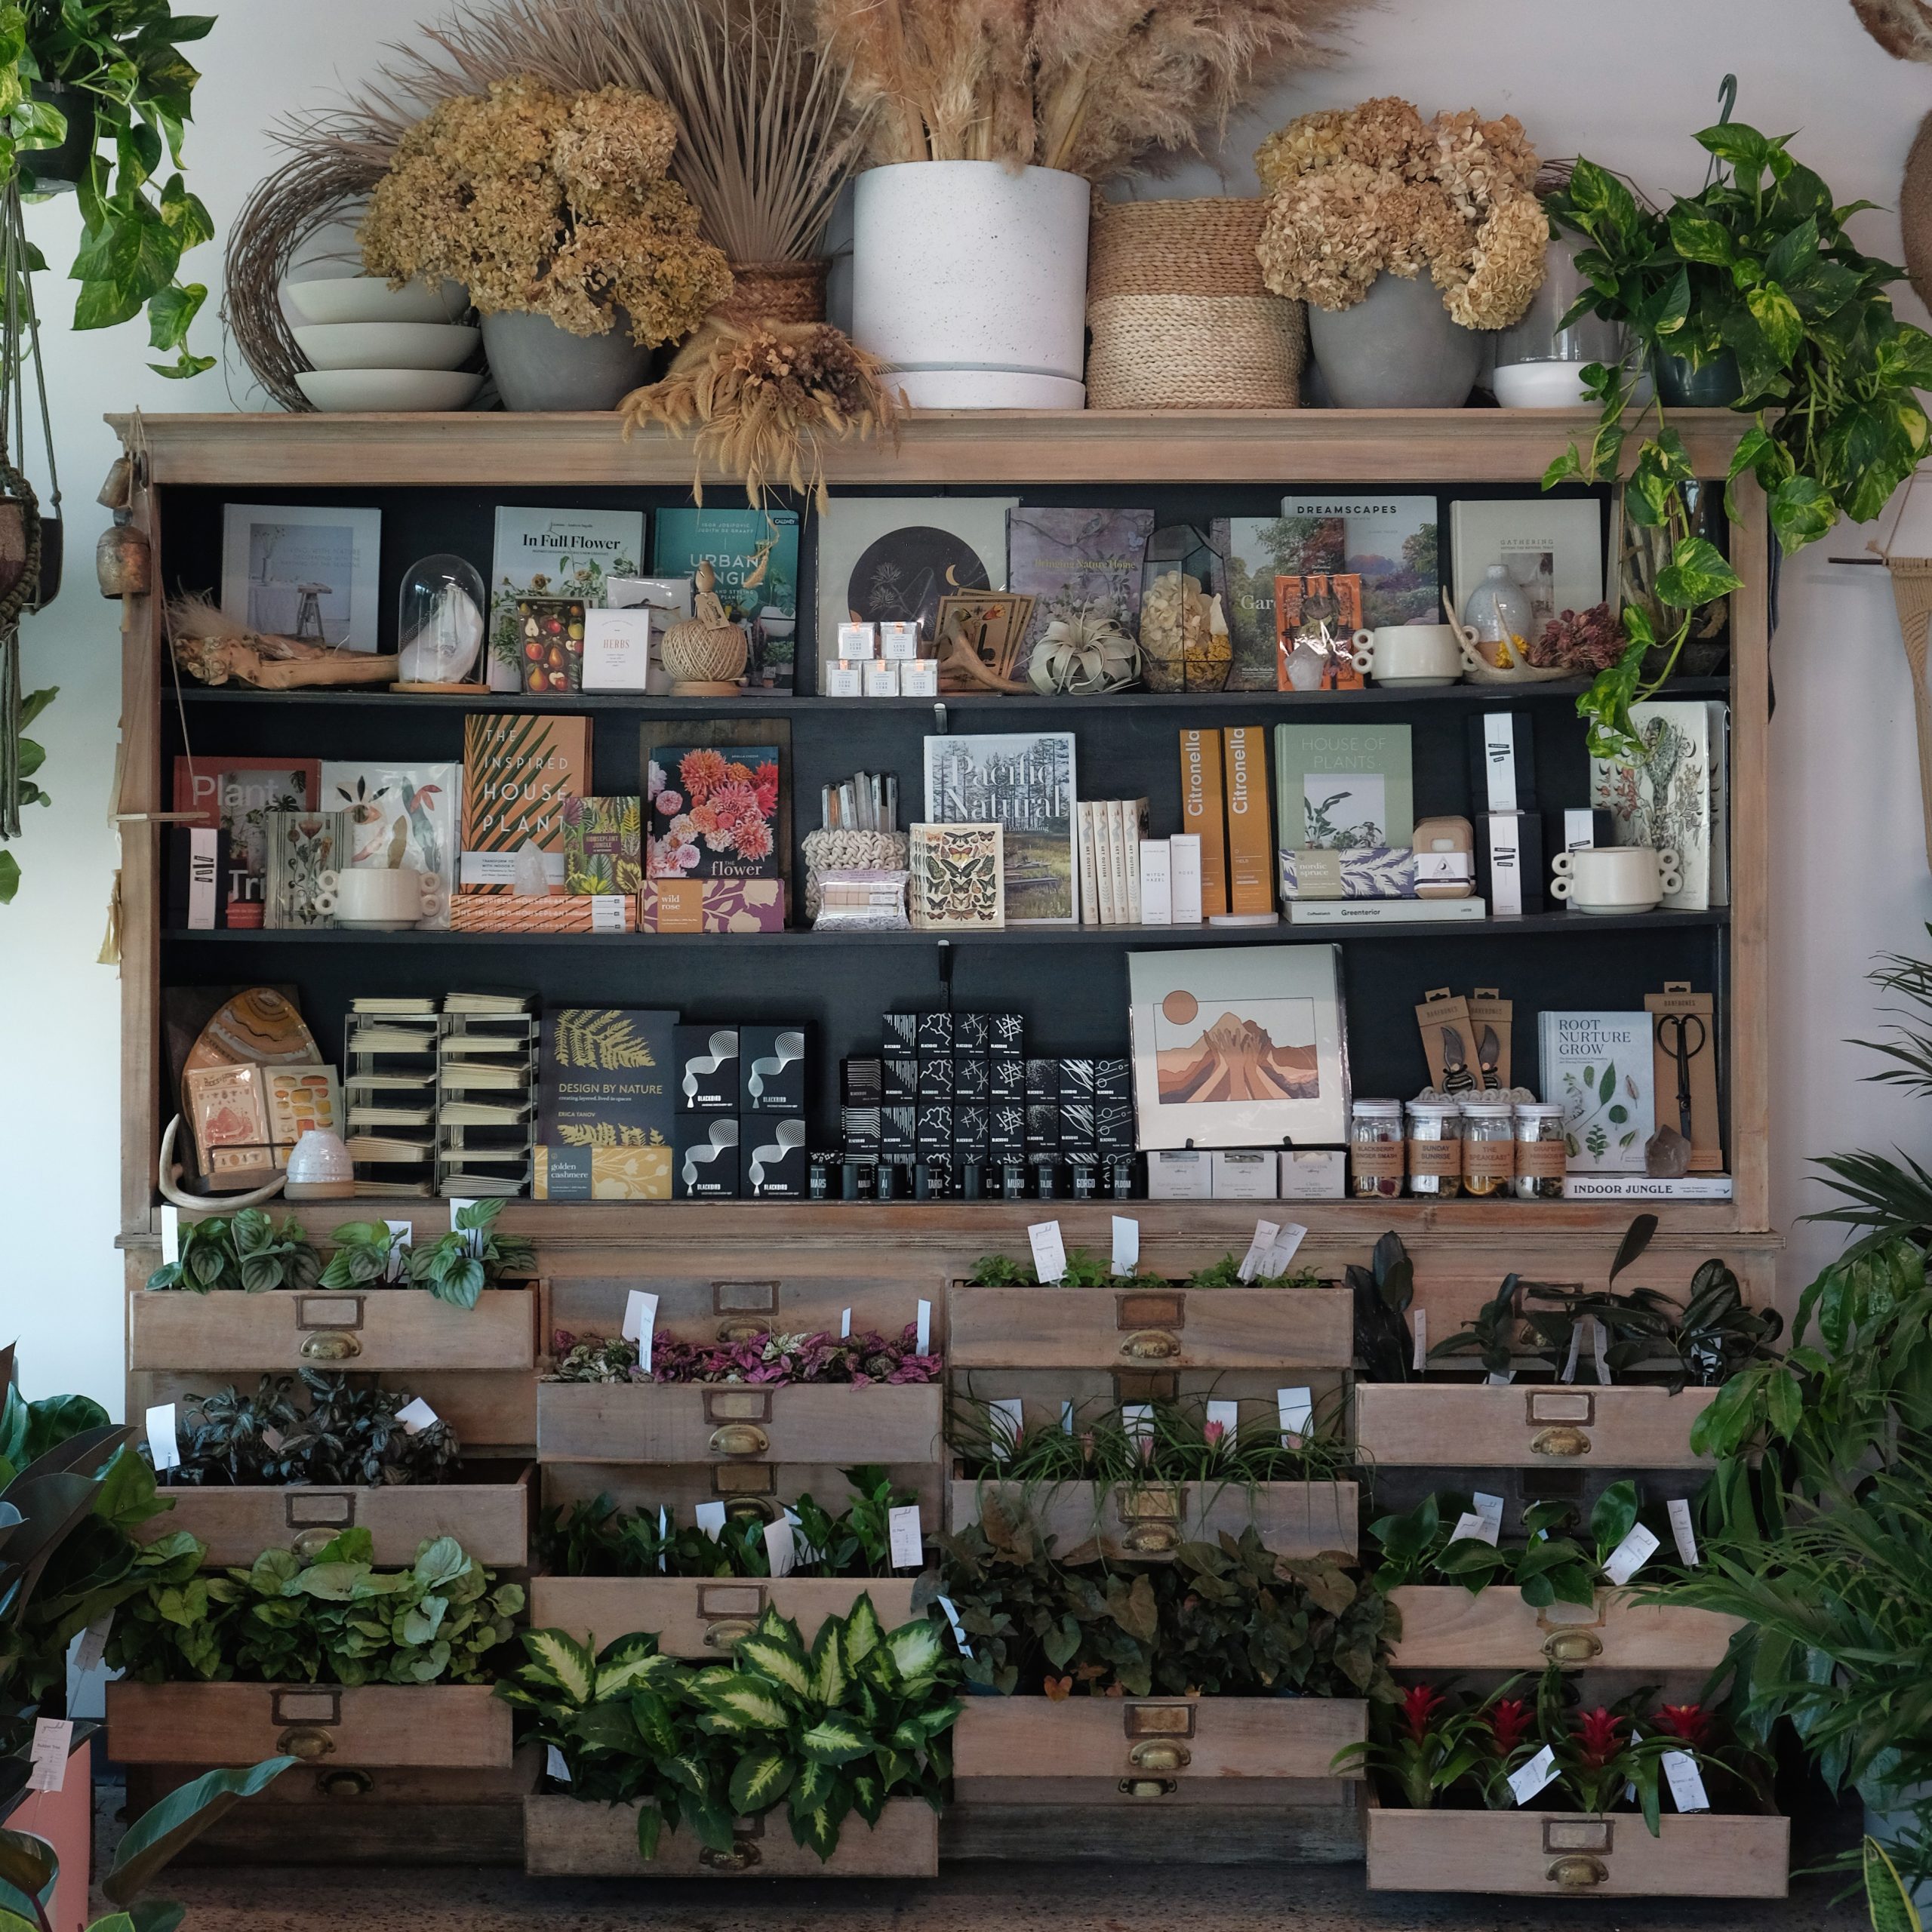 Display at Grounded Plant and Floral Co.